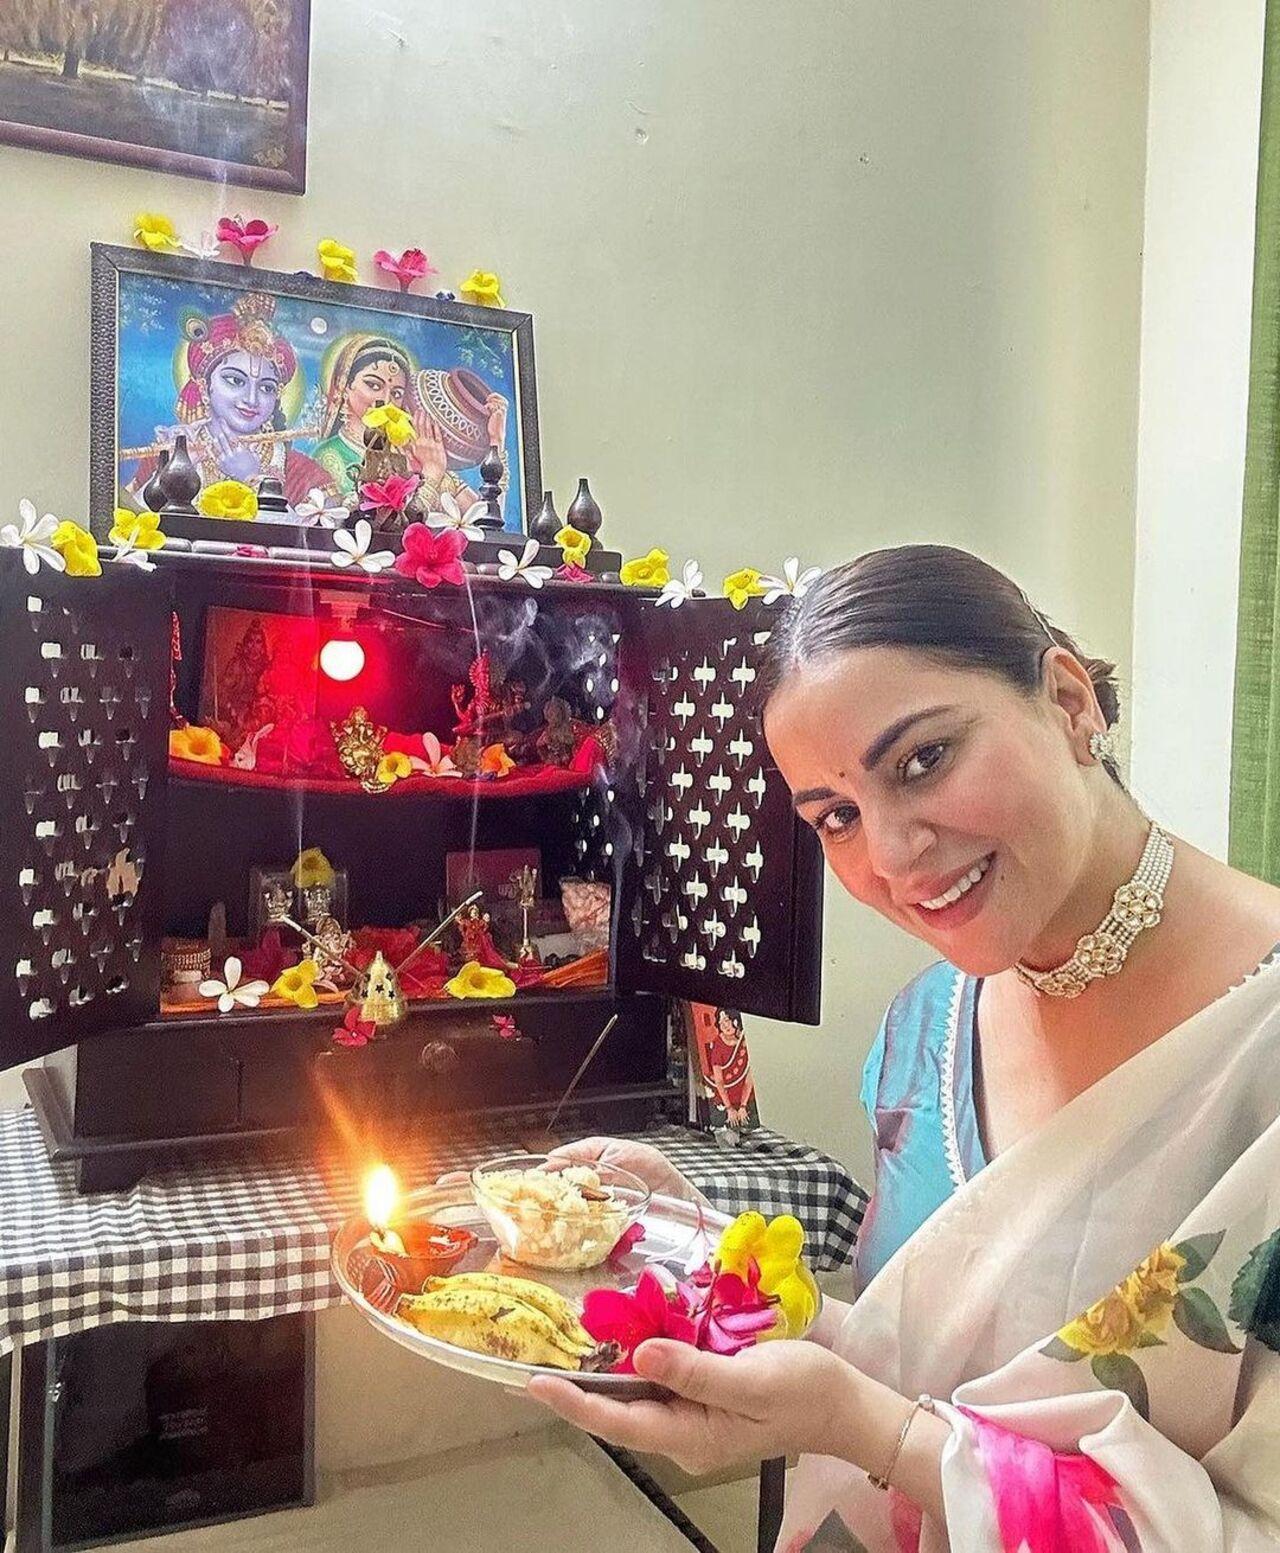 Shraddha Arya did a pooja at home on the occasion of Ganesh Chaturthi. She shared pictures on Instagram